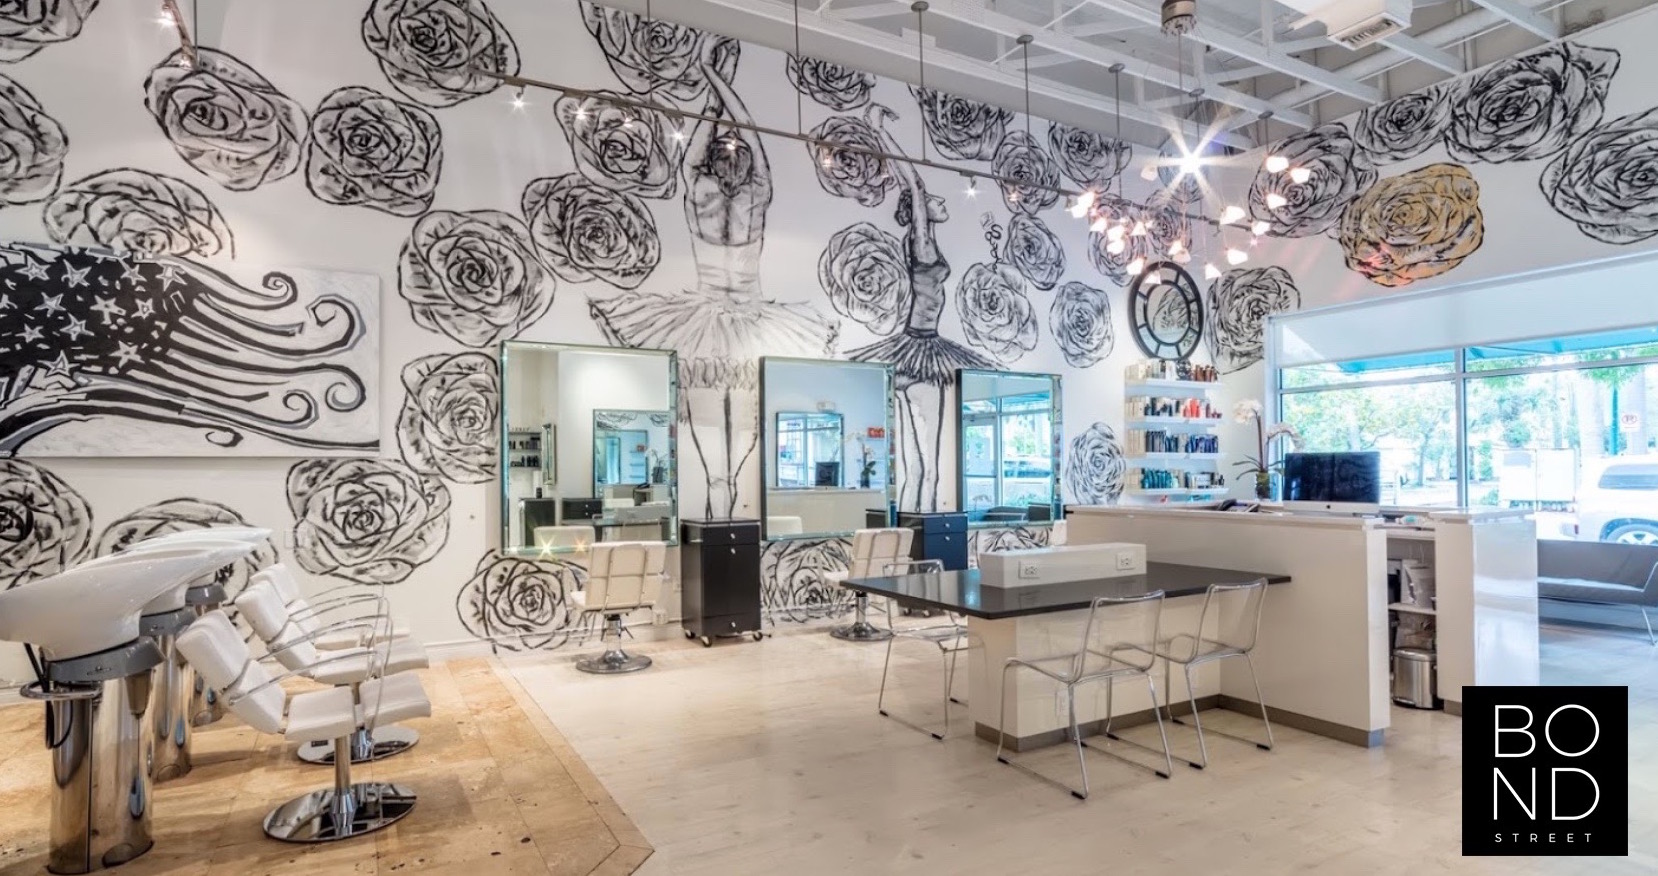 Delray Beach Salon Offers Great Experience for All - Digital Journal